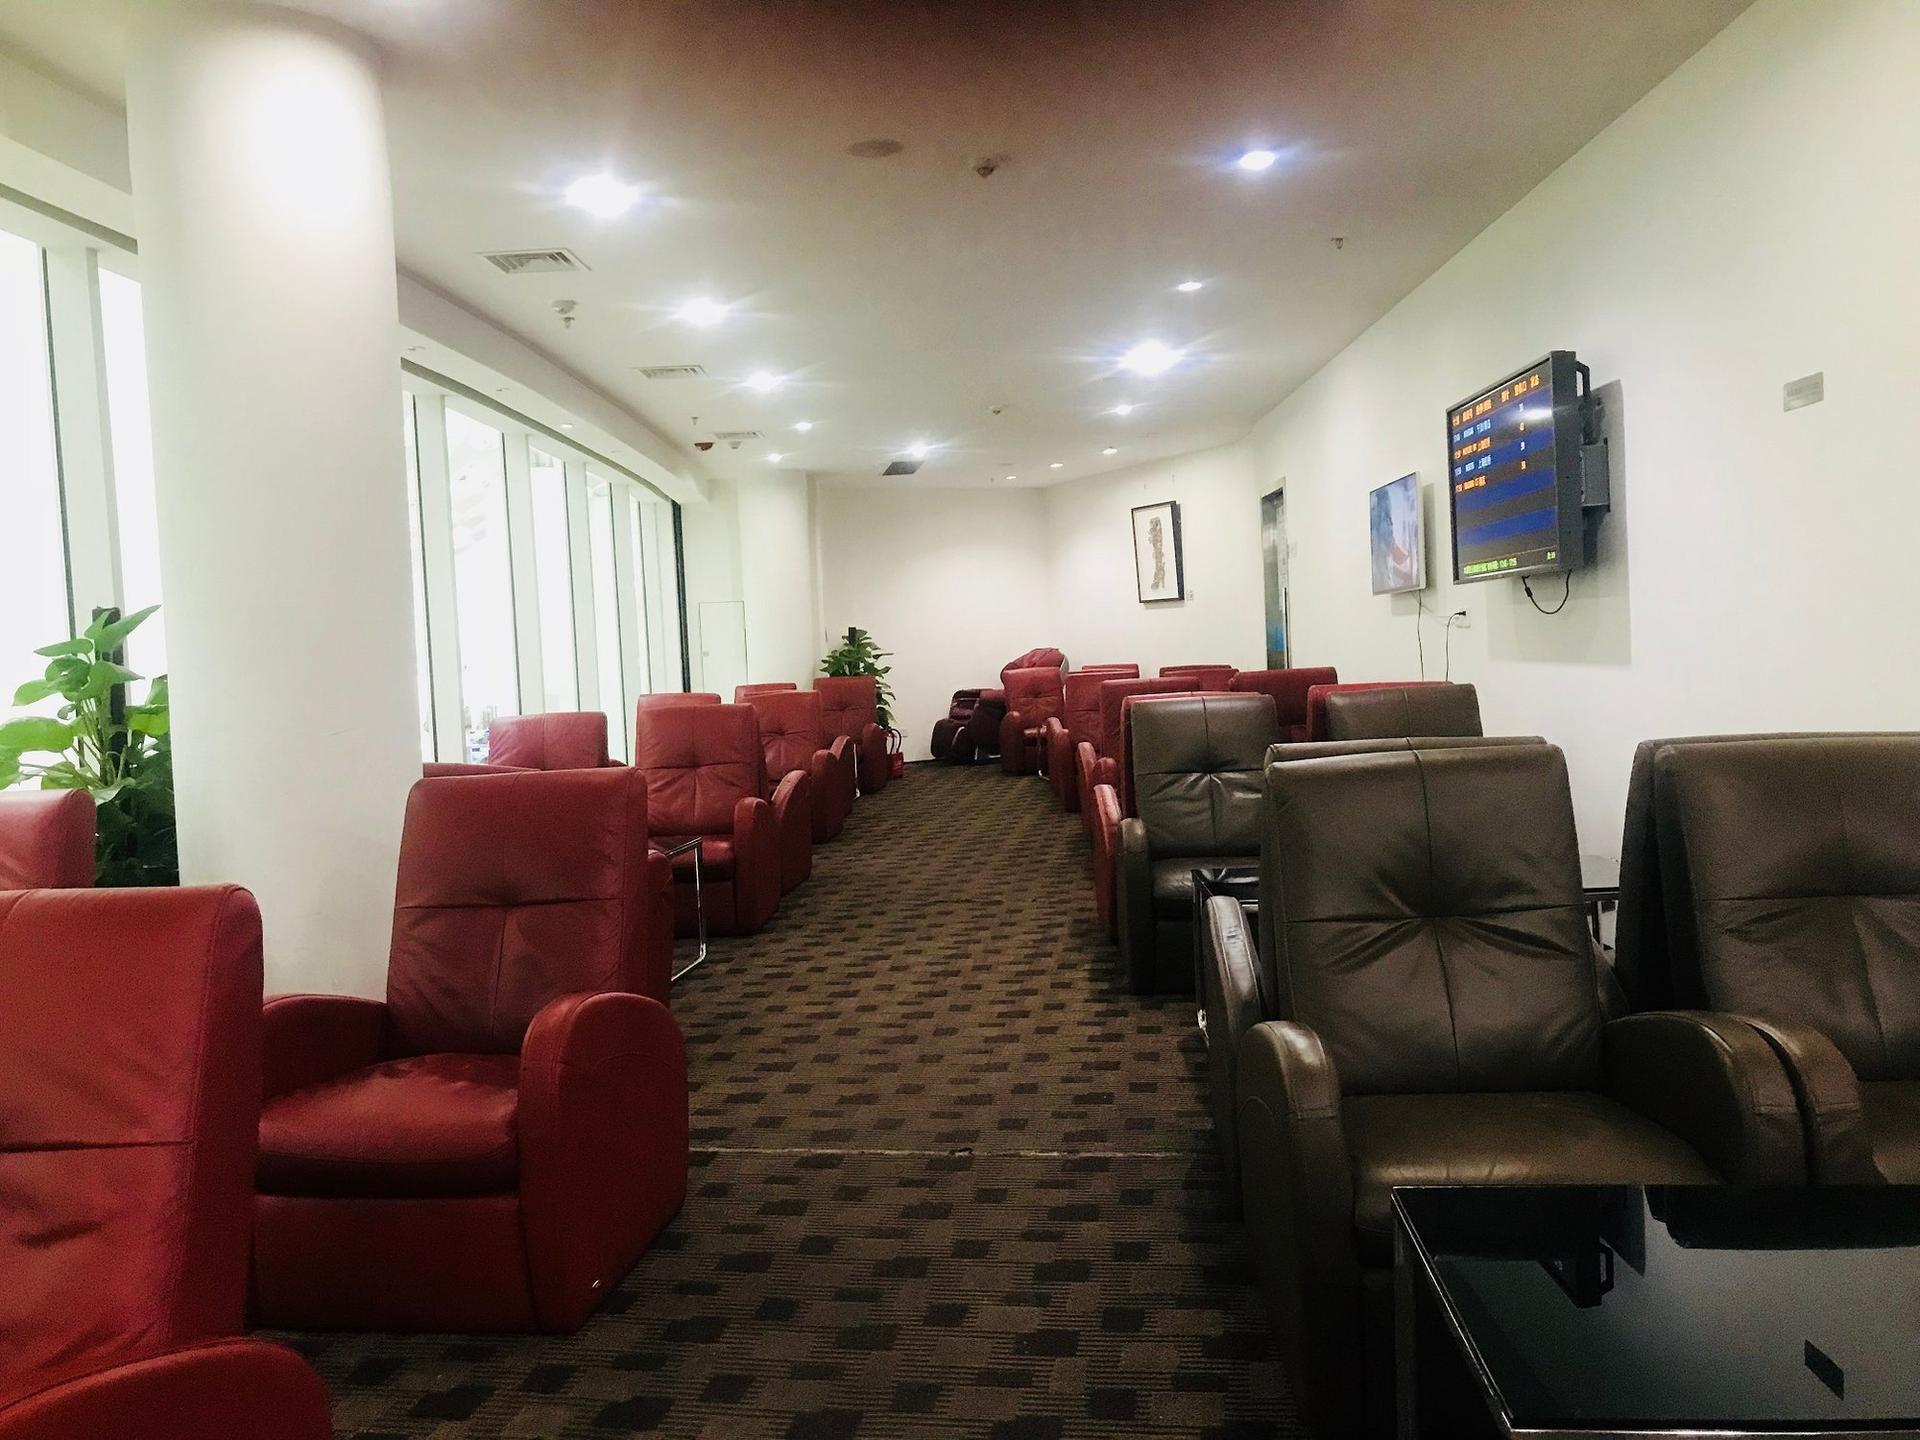 Shenzhen Airport First & Business Class Lounge (Joyee 1) (Closed For Renovation - Temporary Location Available) image 3 of 8